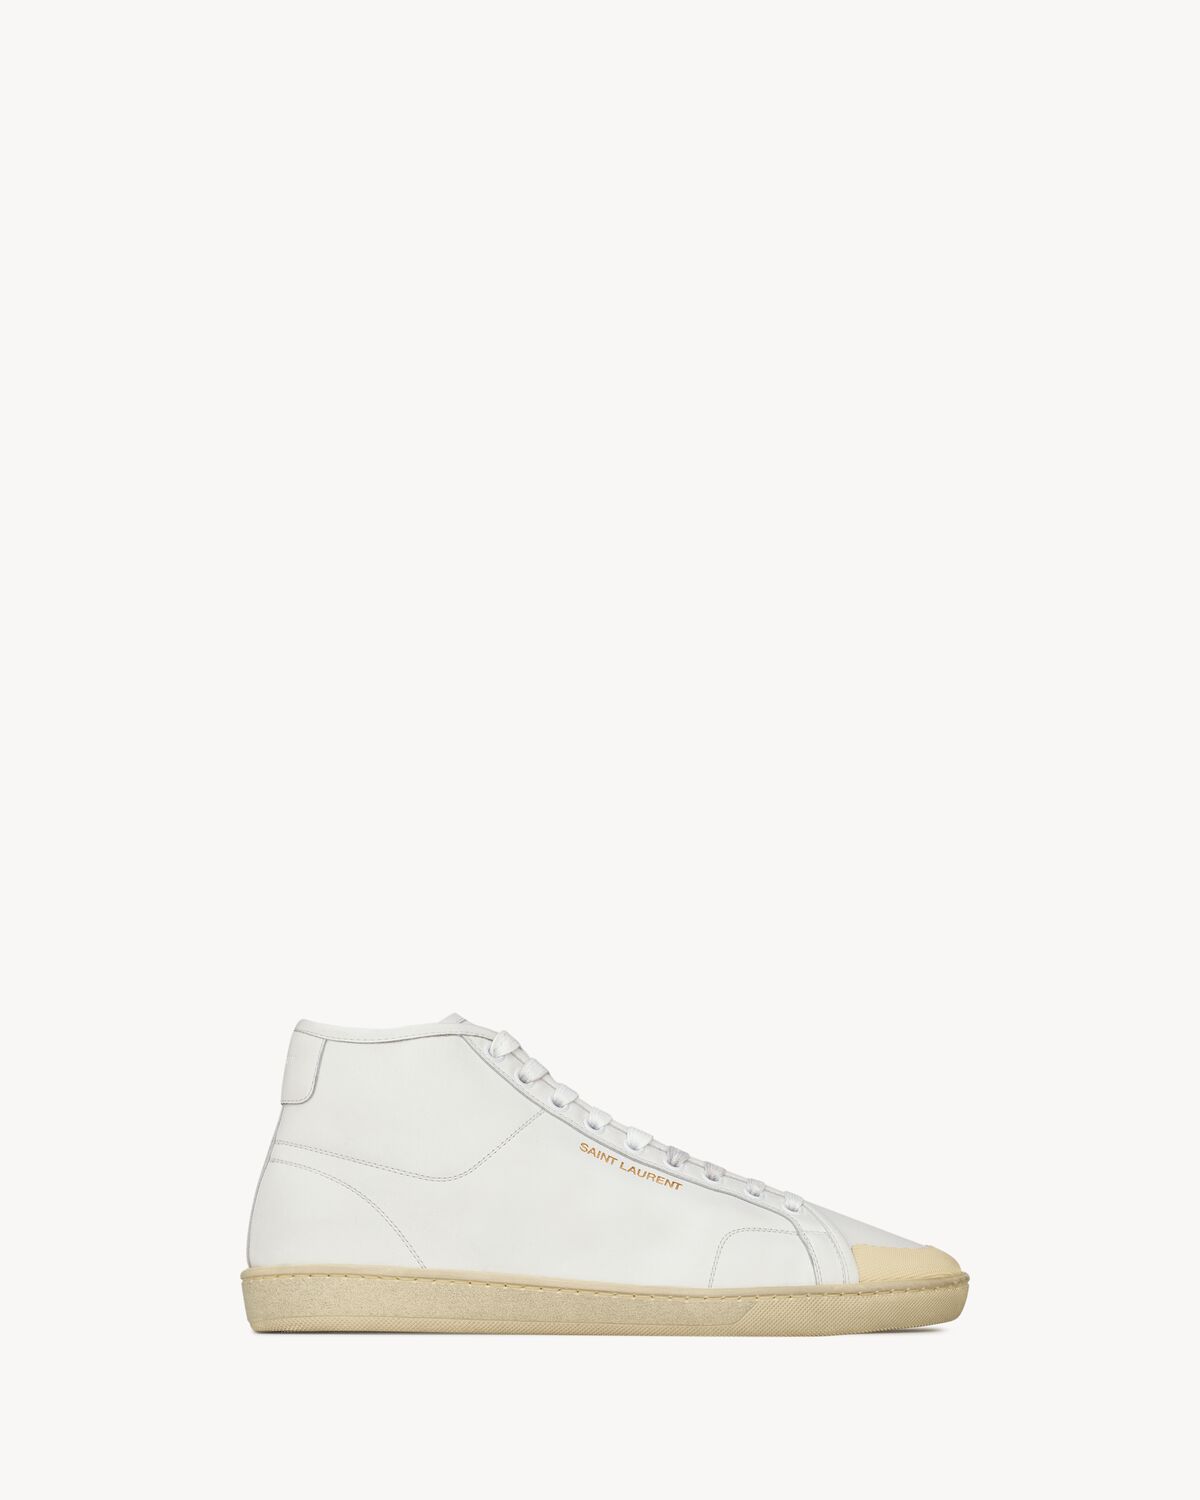 COURT CLASSIC SL/39 mid-top sneakers in grained leather